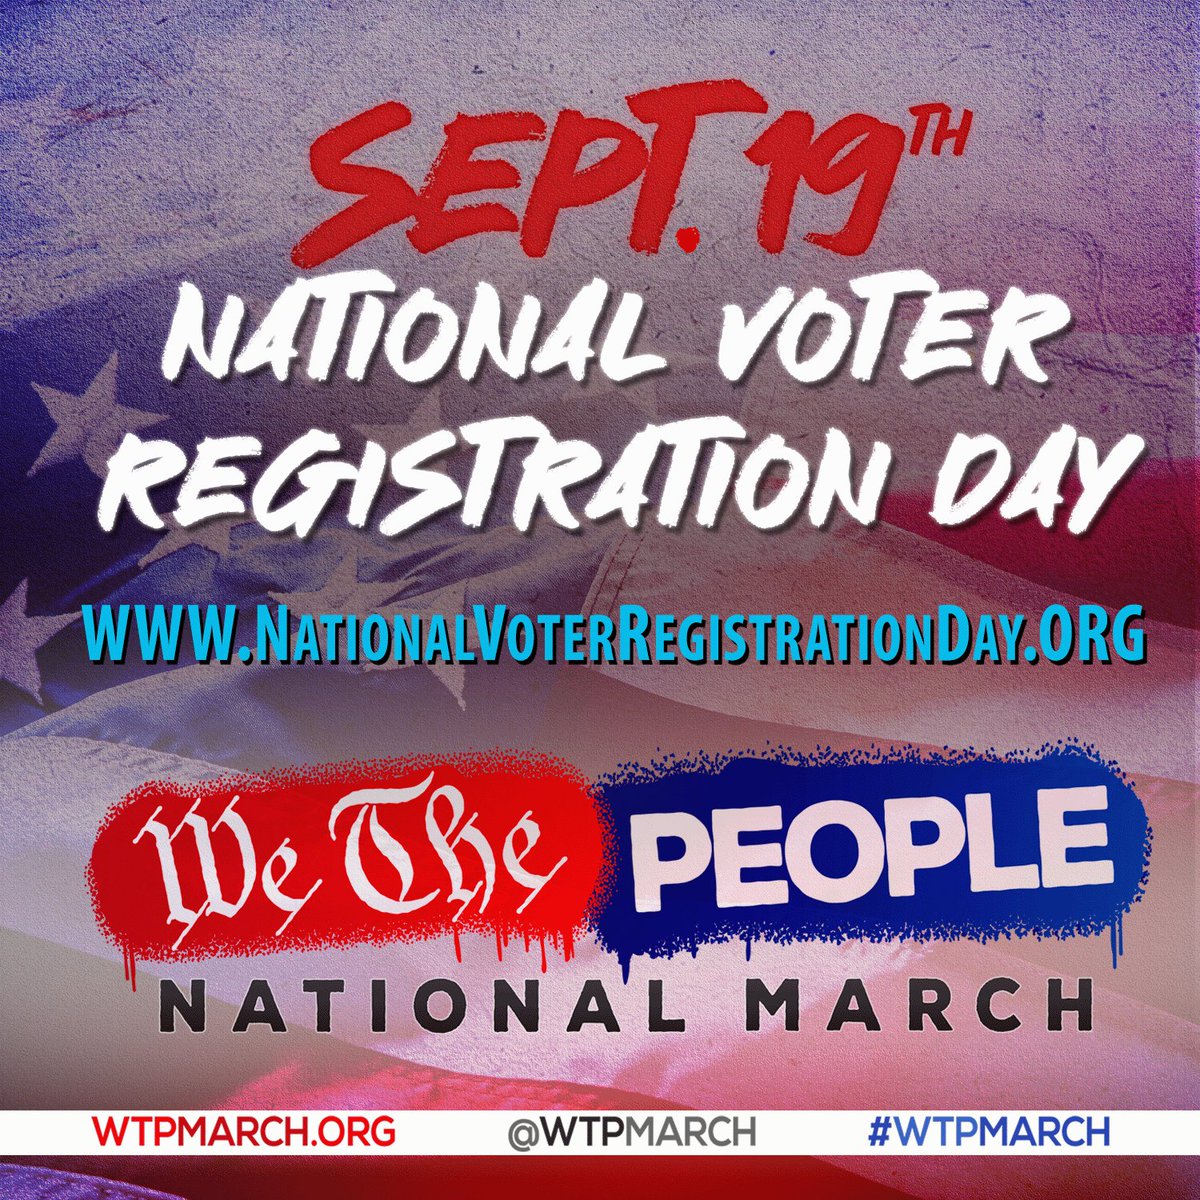 🗳️🇺🇸 On National Voter Registration Day, We The People celebrate the cornerstone of democracy - our right to vote. Register, verify your registration, and encourage others to do the same. nationalvoterregistrationday.org #NationalVoterRegistrationDay #WeThePeople #WTPElectionReady